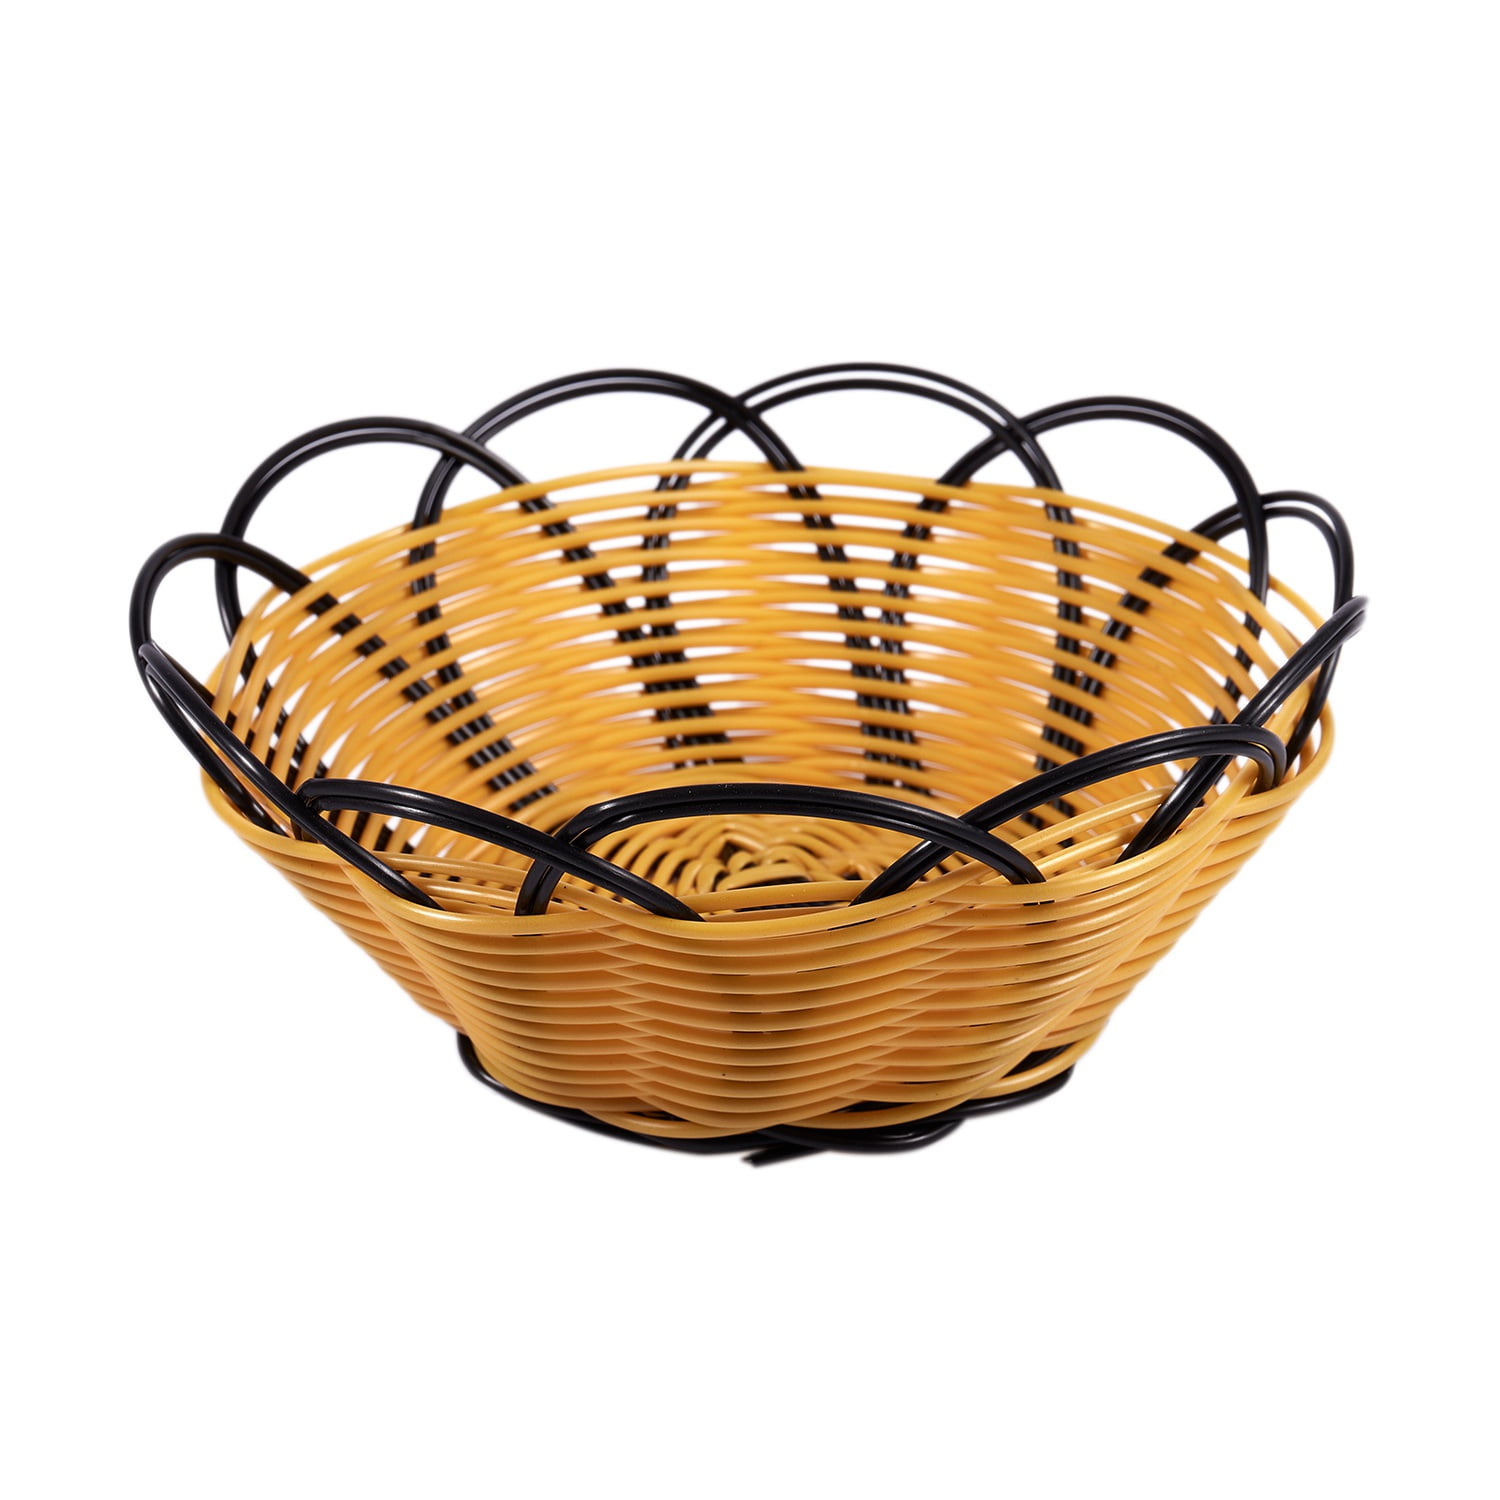 7 inch Plastic Braided Basket Fruit Vegetable Cookies Container Holder P1B6 